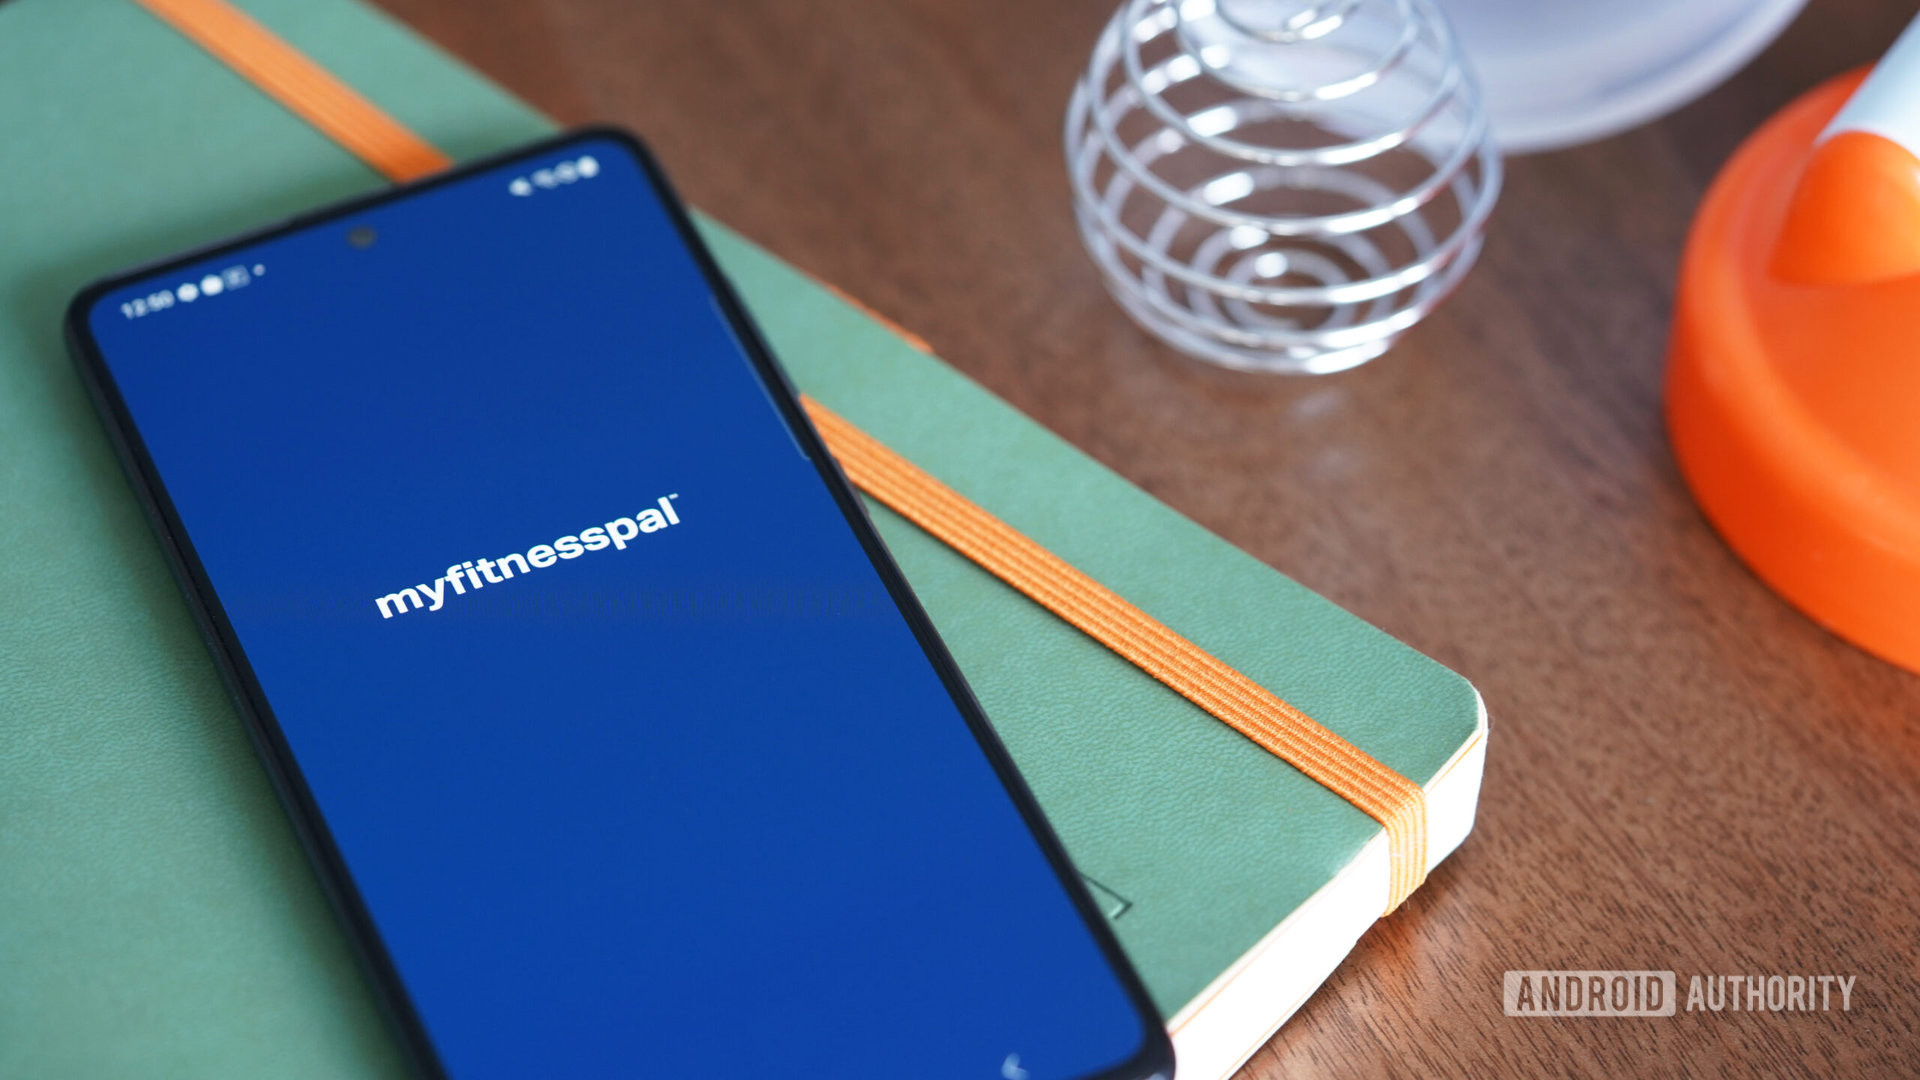 A Samsung Galaxy A51 display the MyFitnessPal app's opening screen.